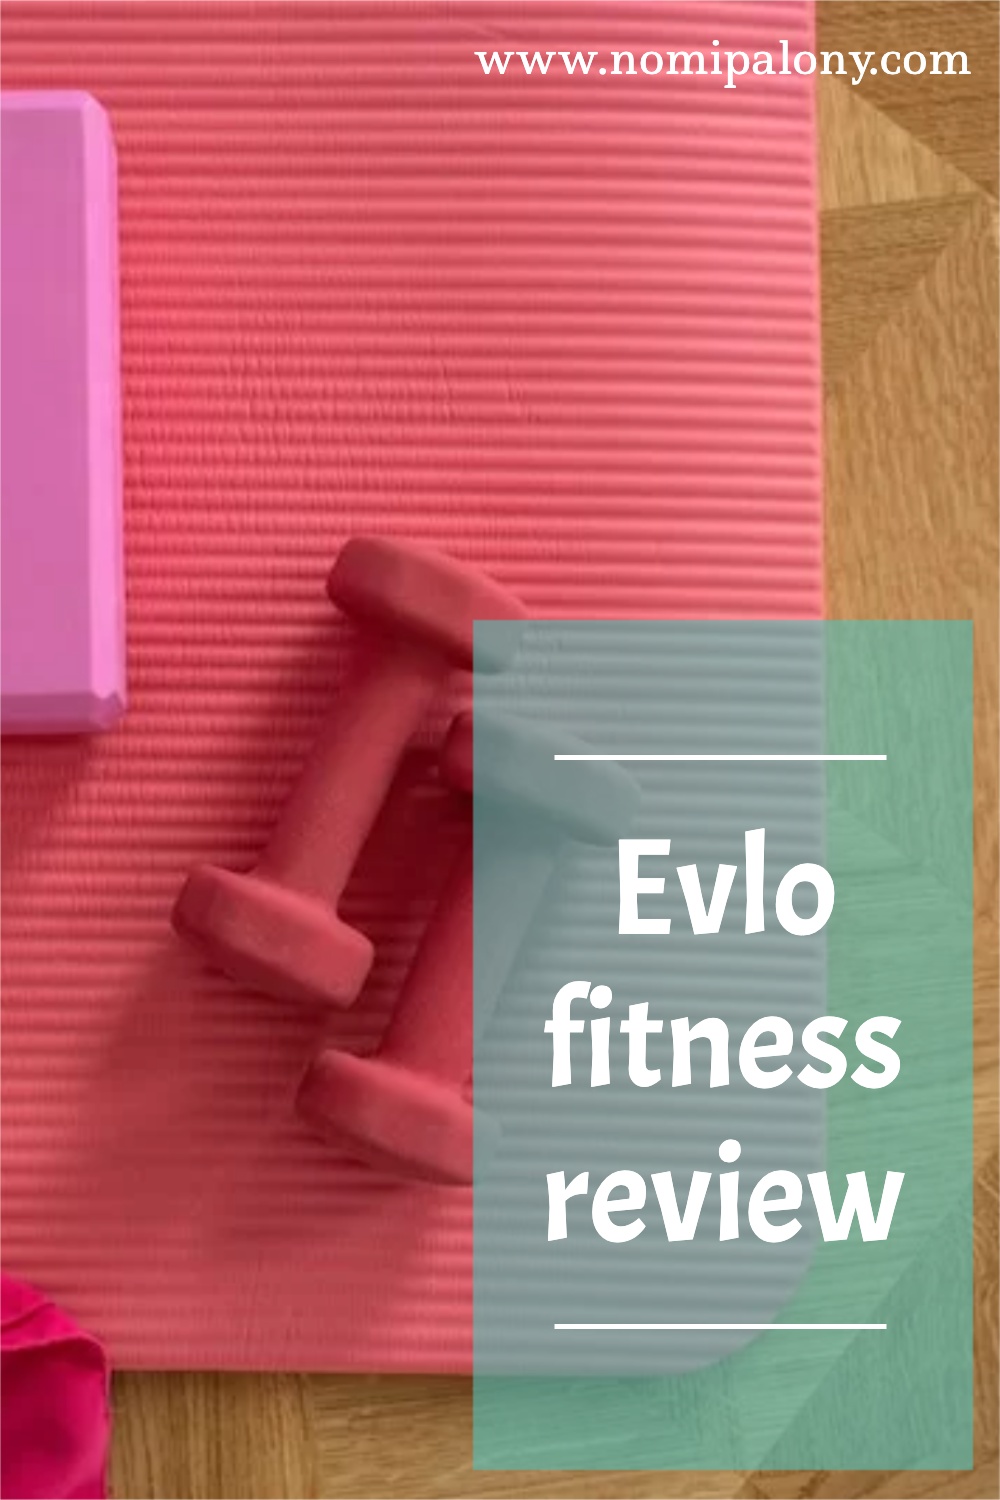 Evlo fitness review 